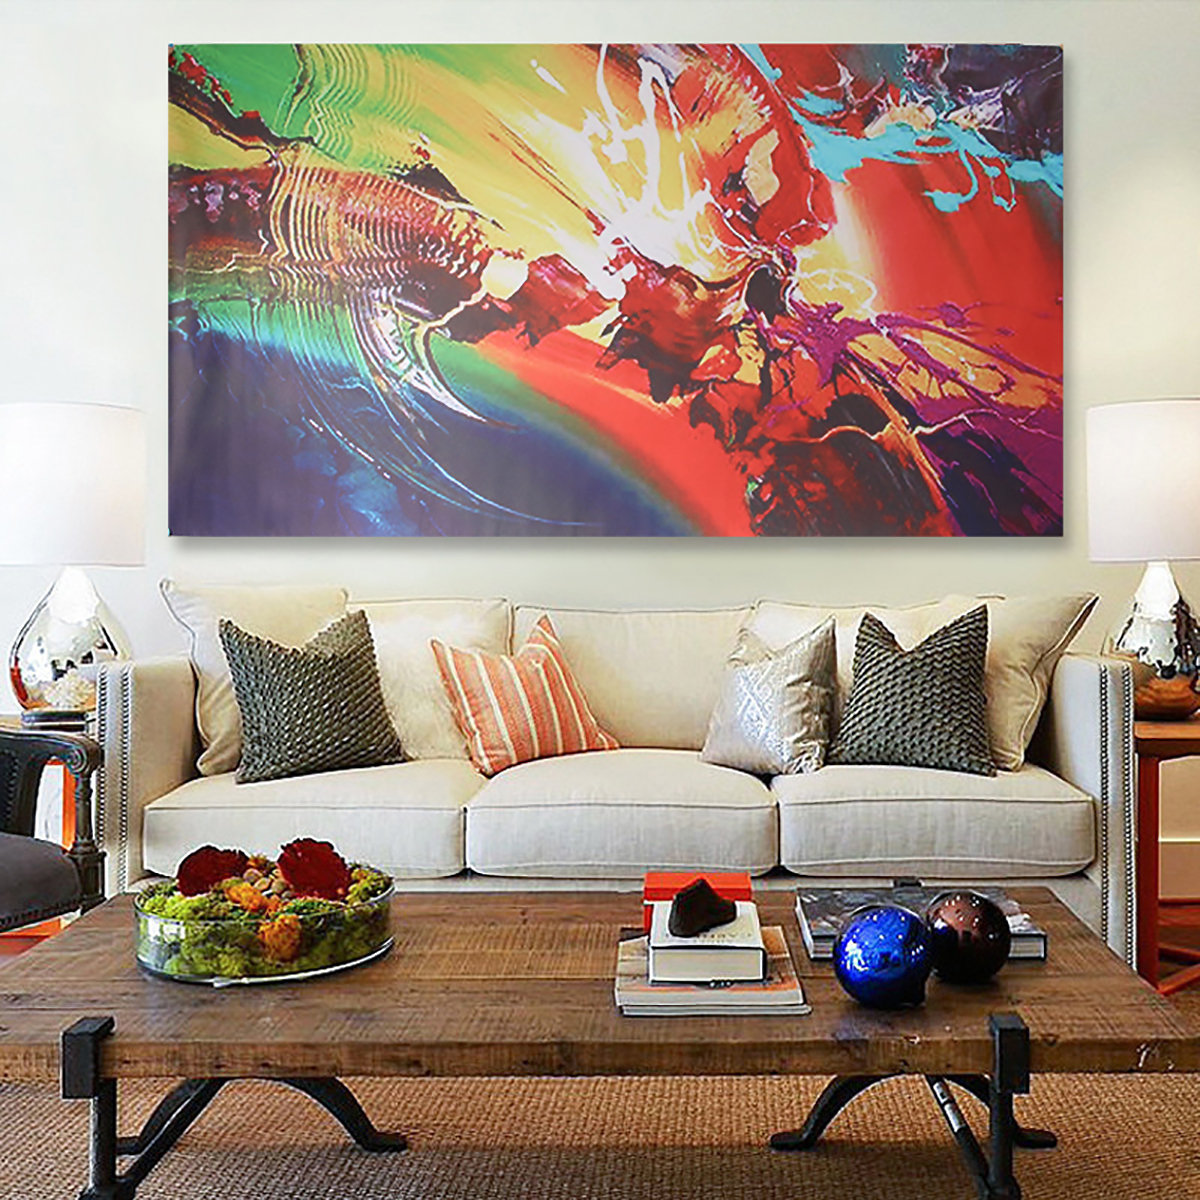 

Huge Modern Abstract Art Hand-painted Painting